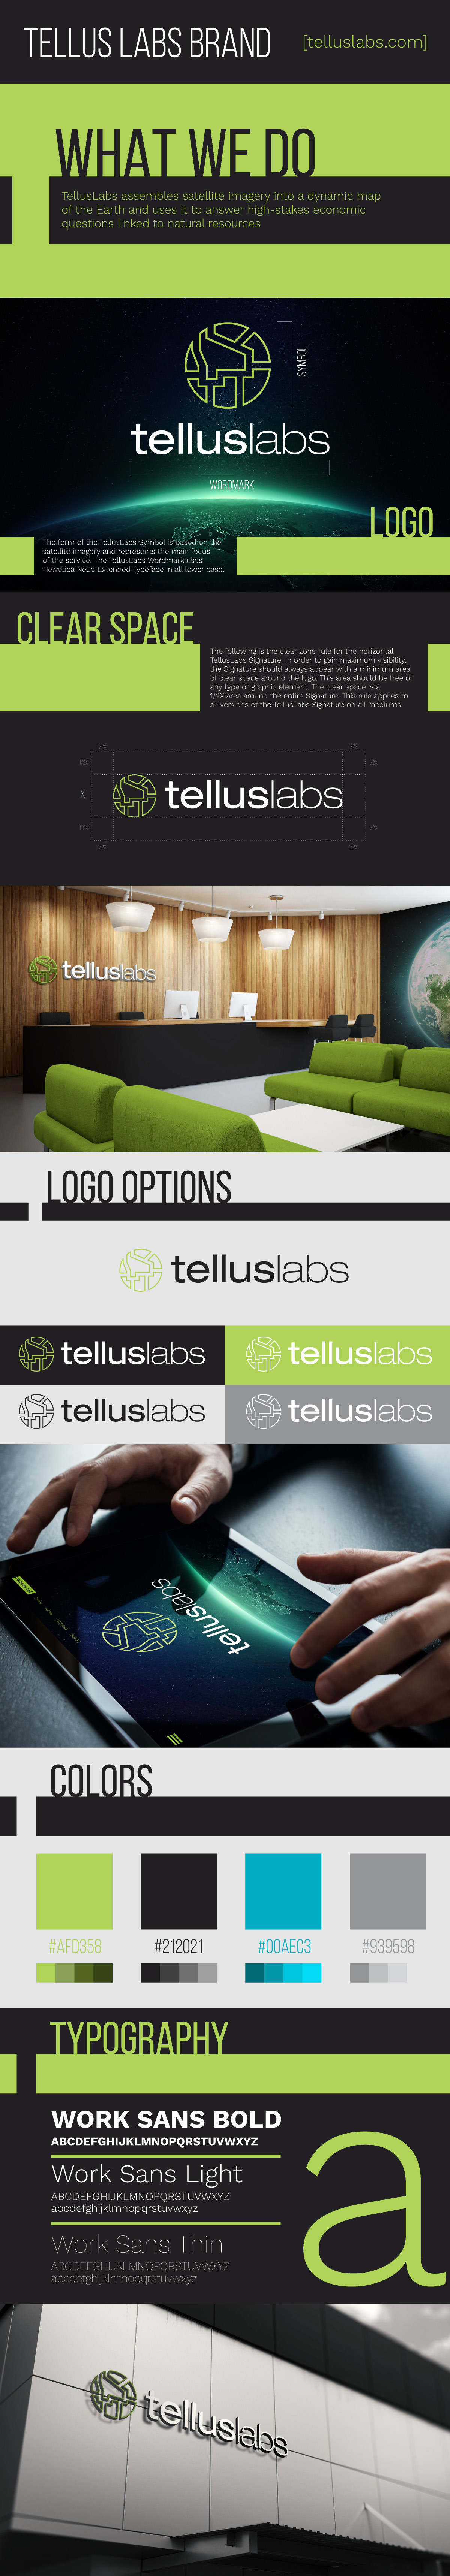 Tellus Labs Brand – Brand Development and Visual Style Guidelines